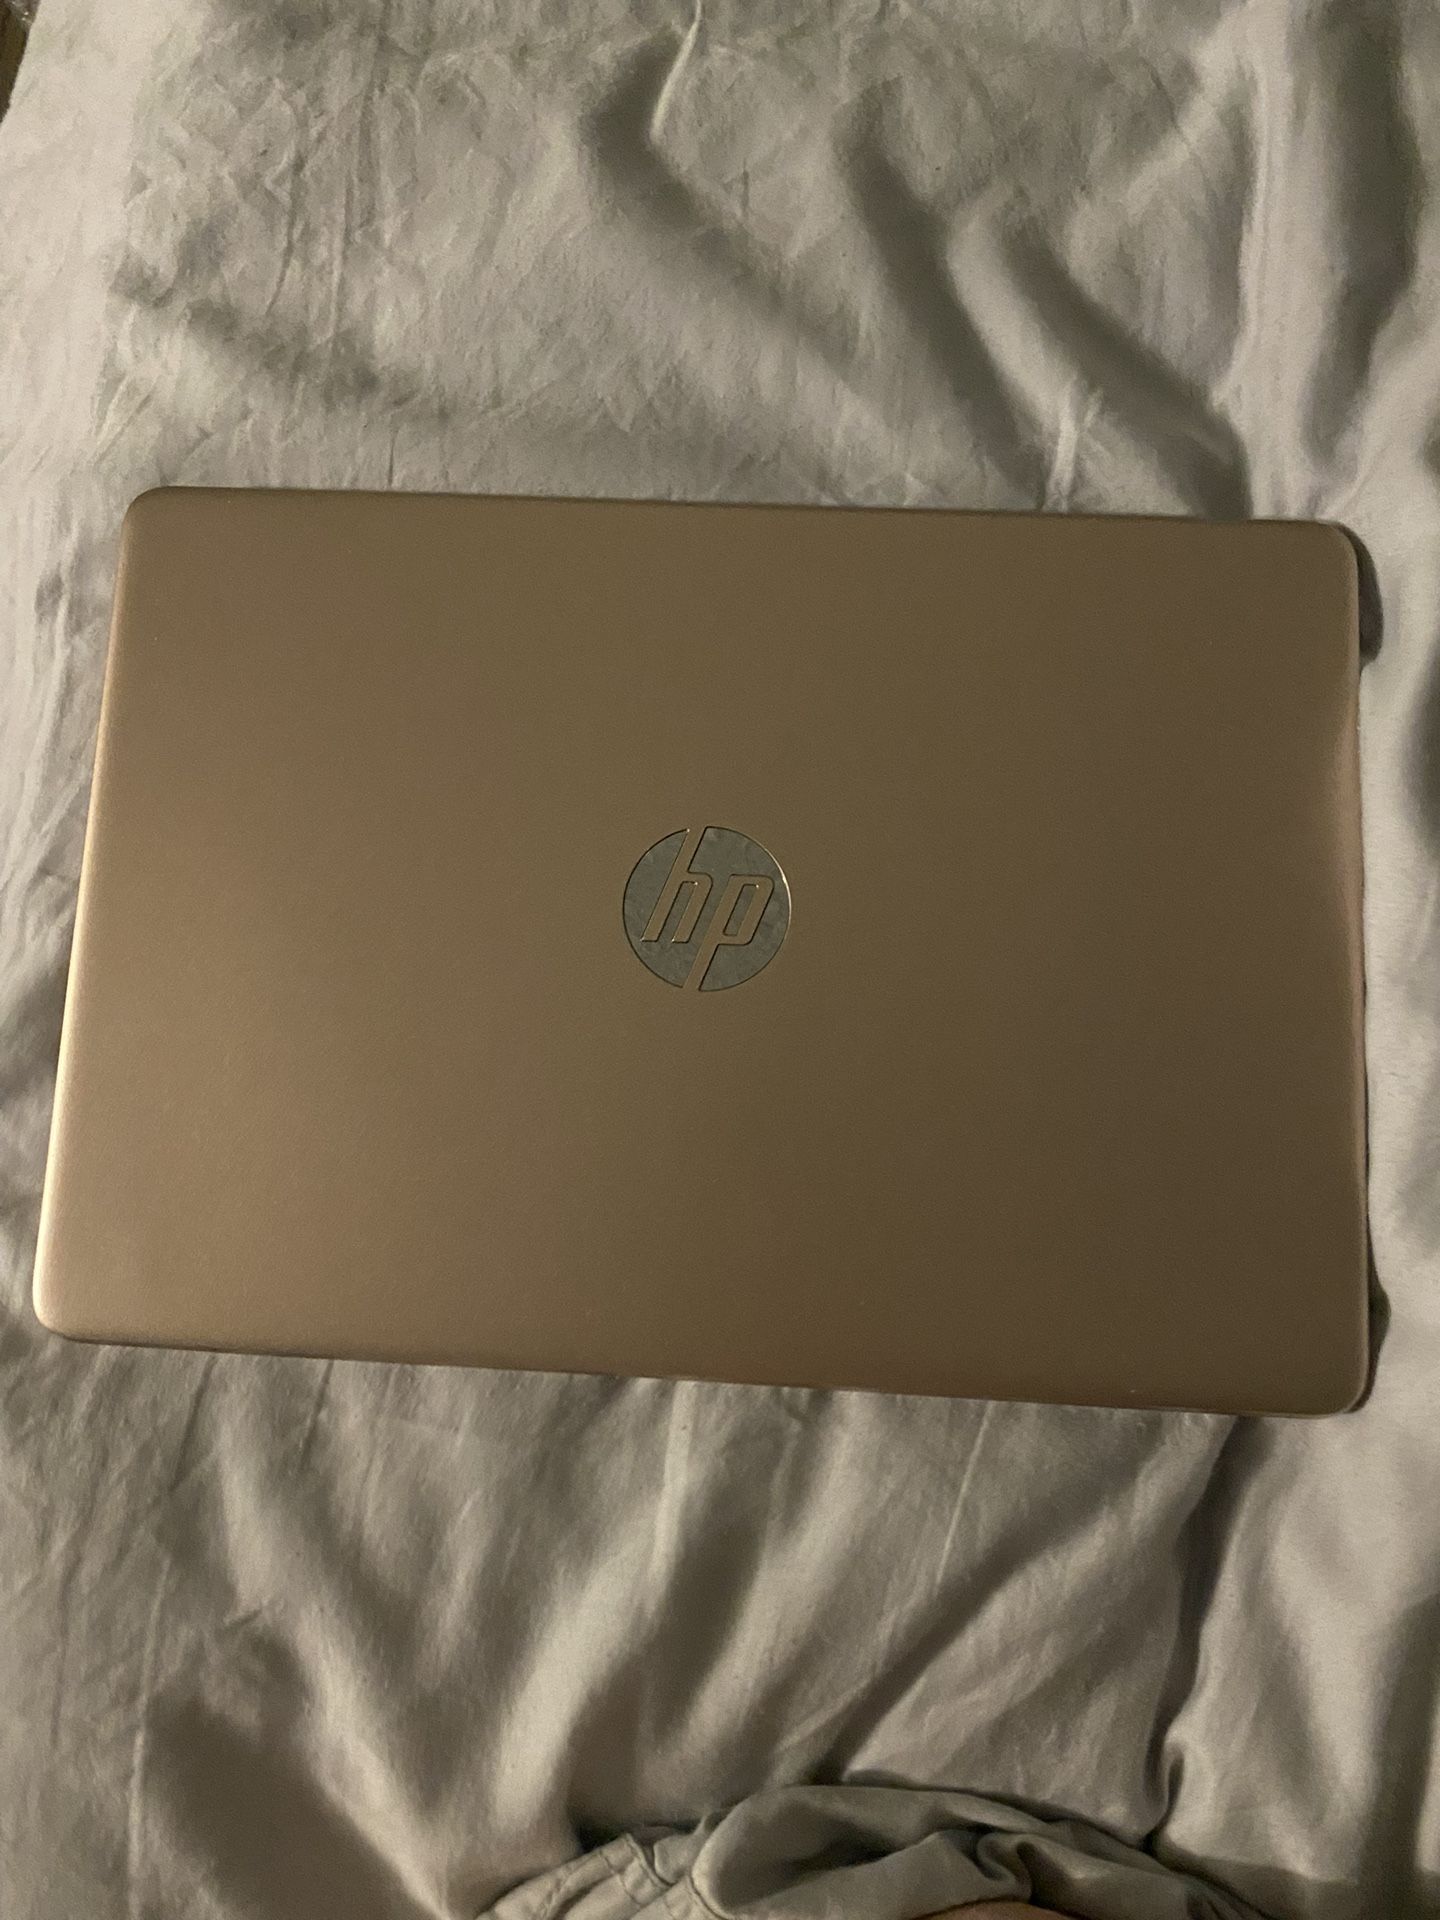 Hp Laptop With Charger And Headset